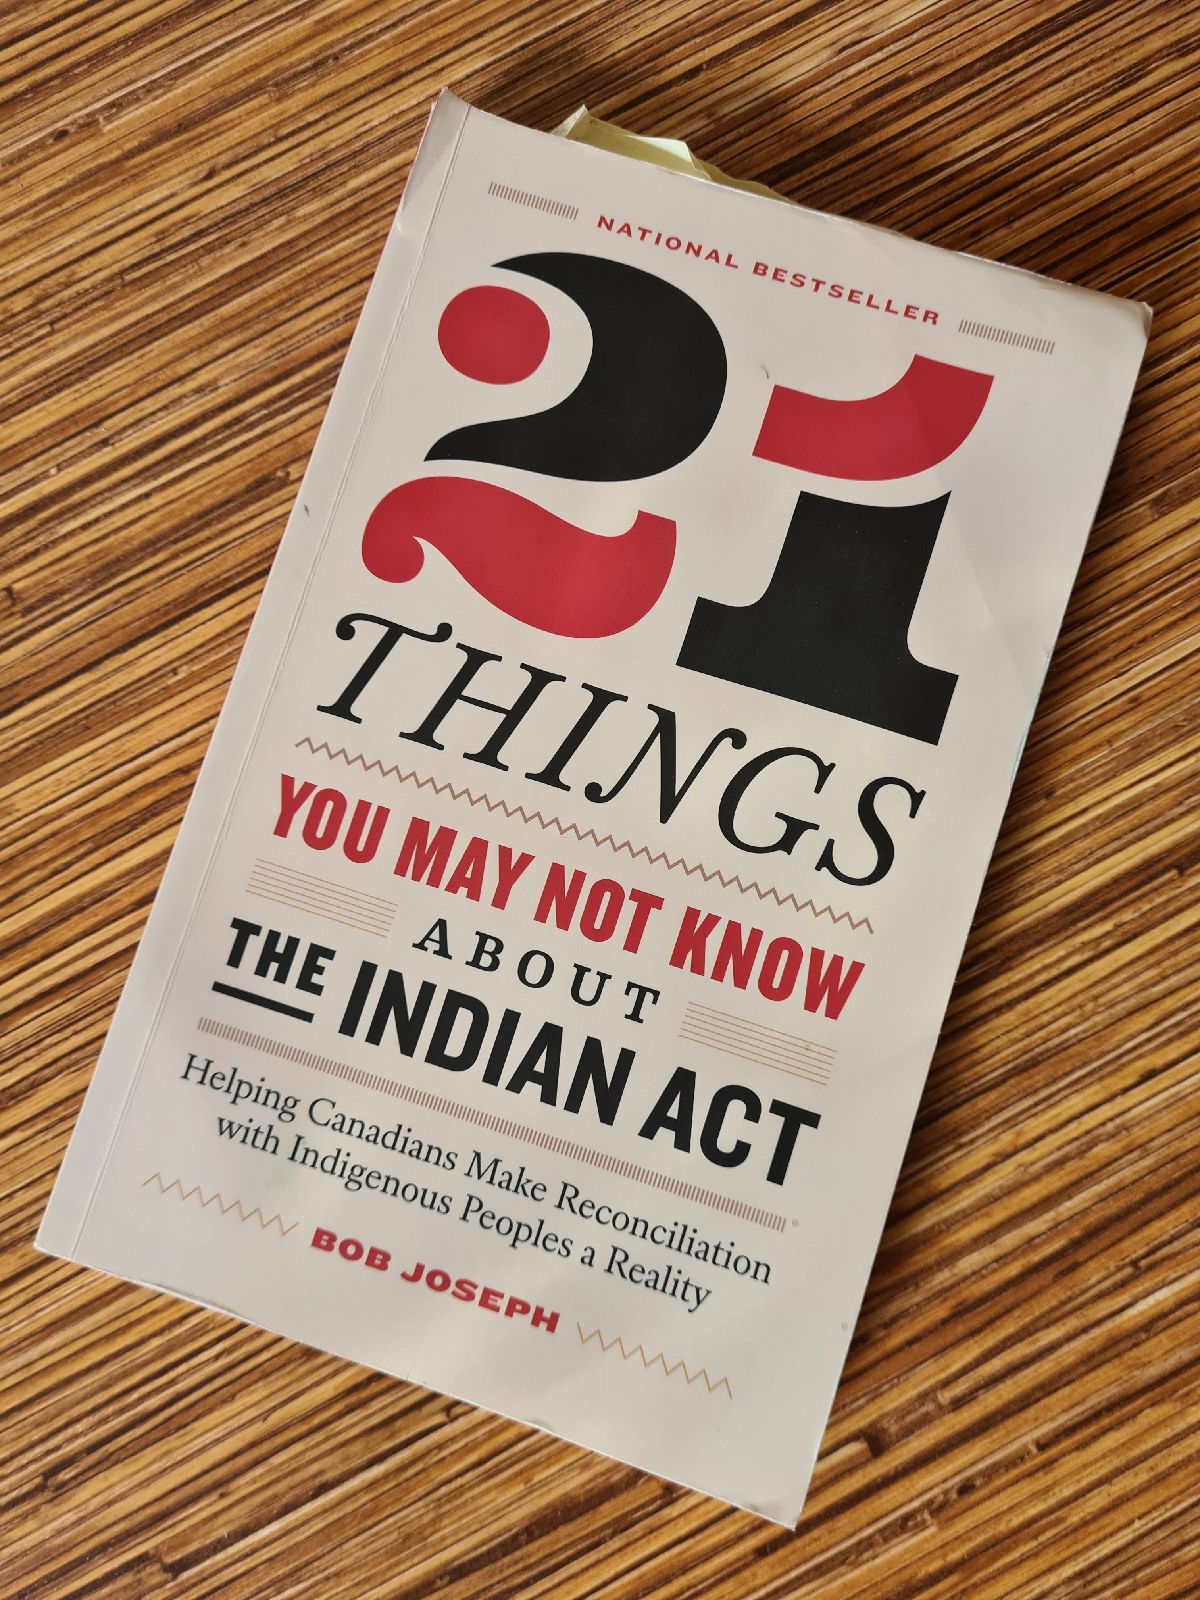 21 things may not know about the Indian Act book on top of a wood surface.